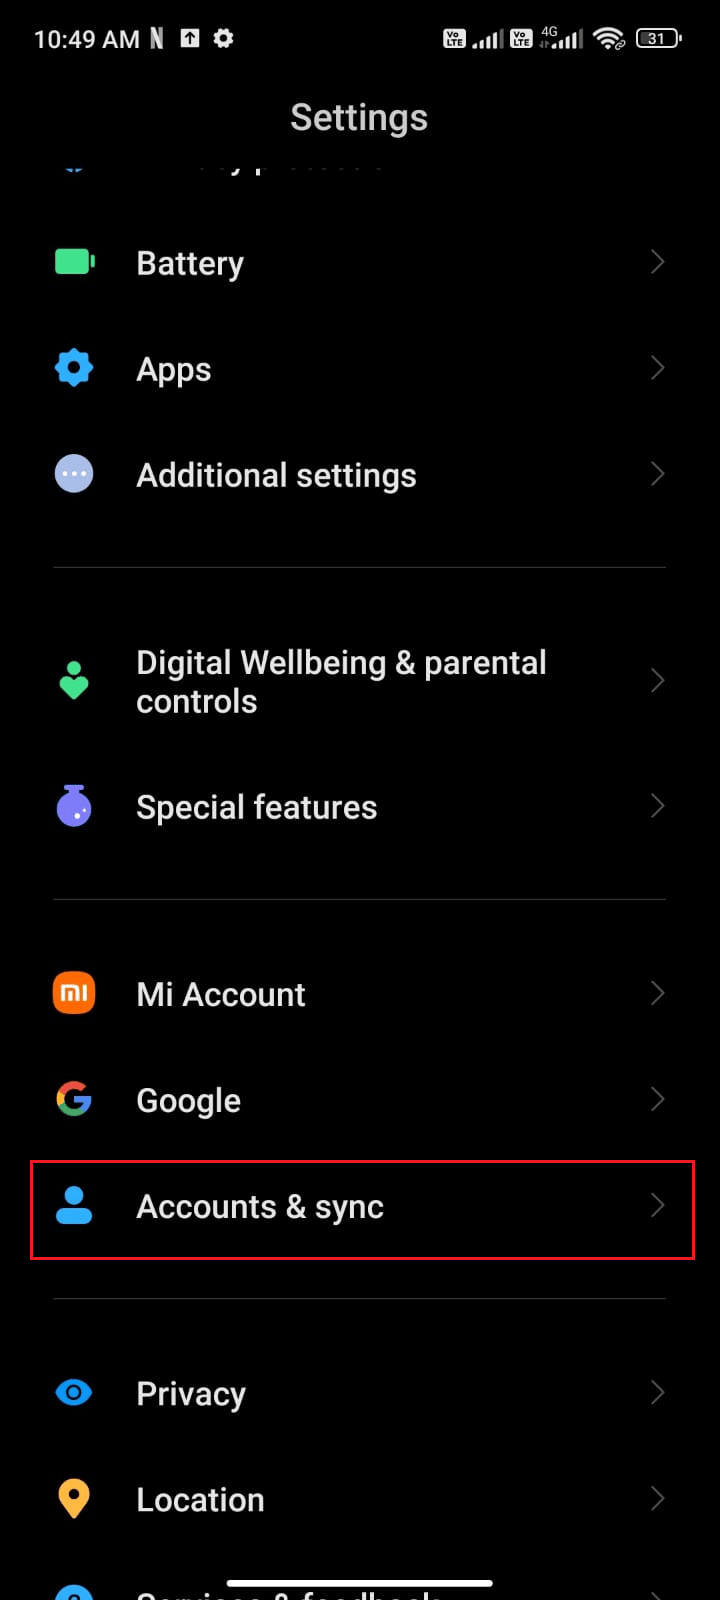 Scroll down the Settings screen and tap Accounts and sync